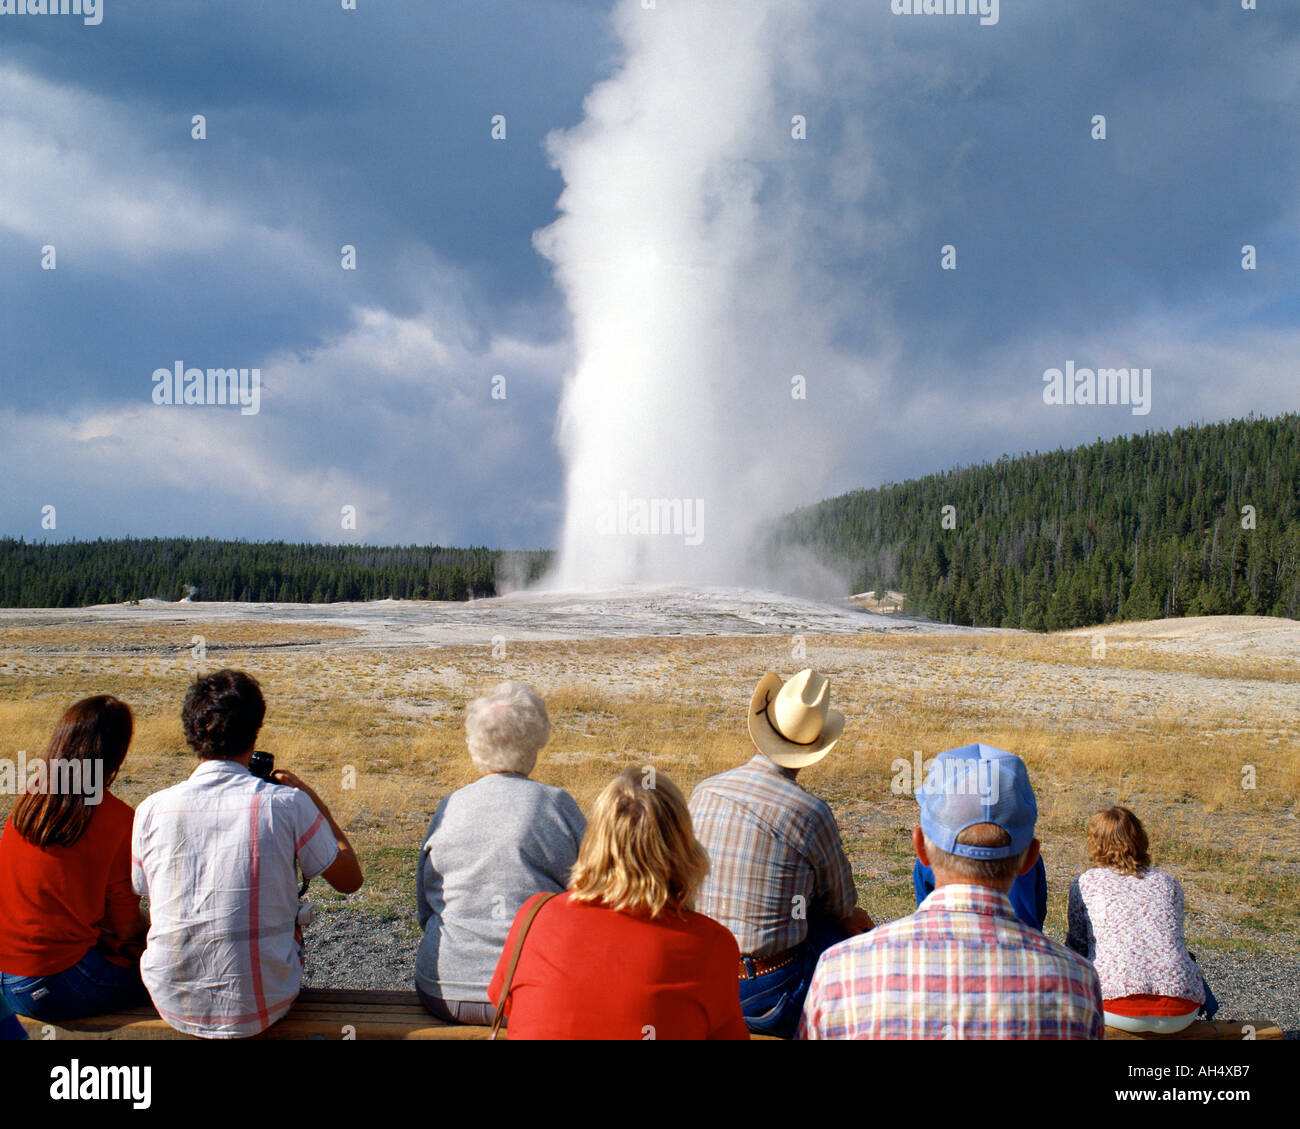 USA - WYOMING : Old Faithful Geyser Yellowstone National Park Banque D'Images